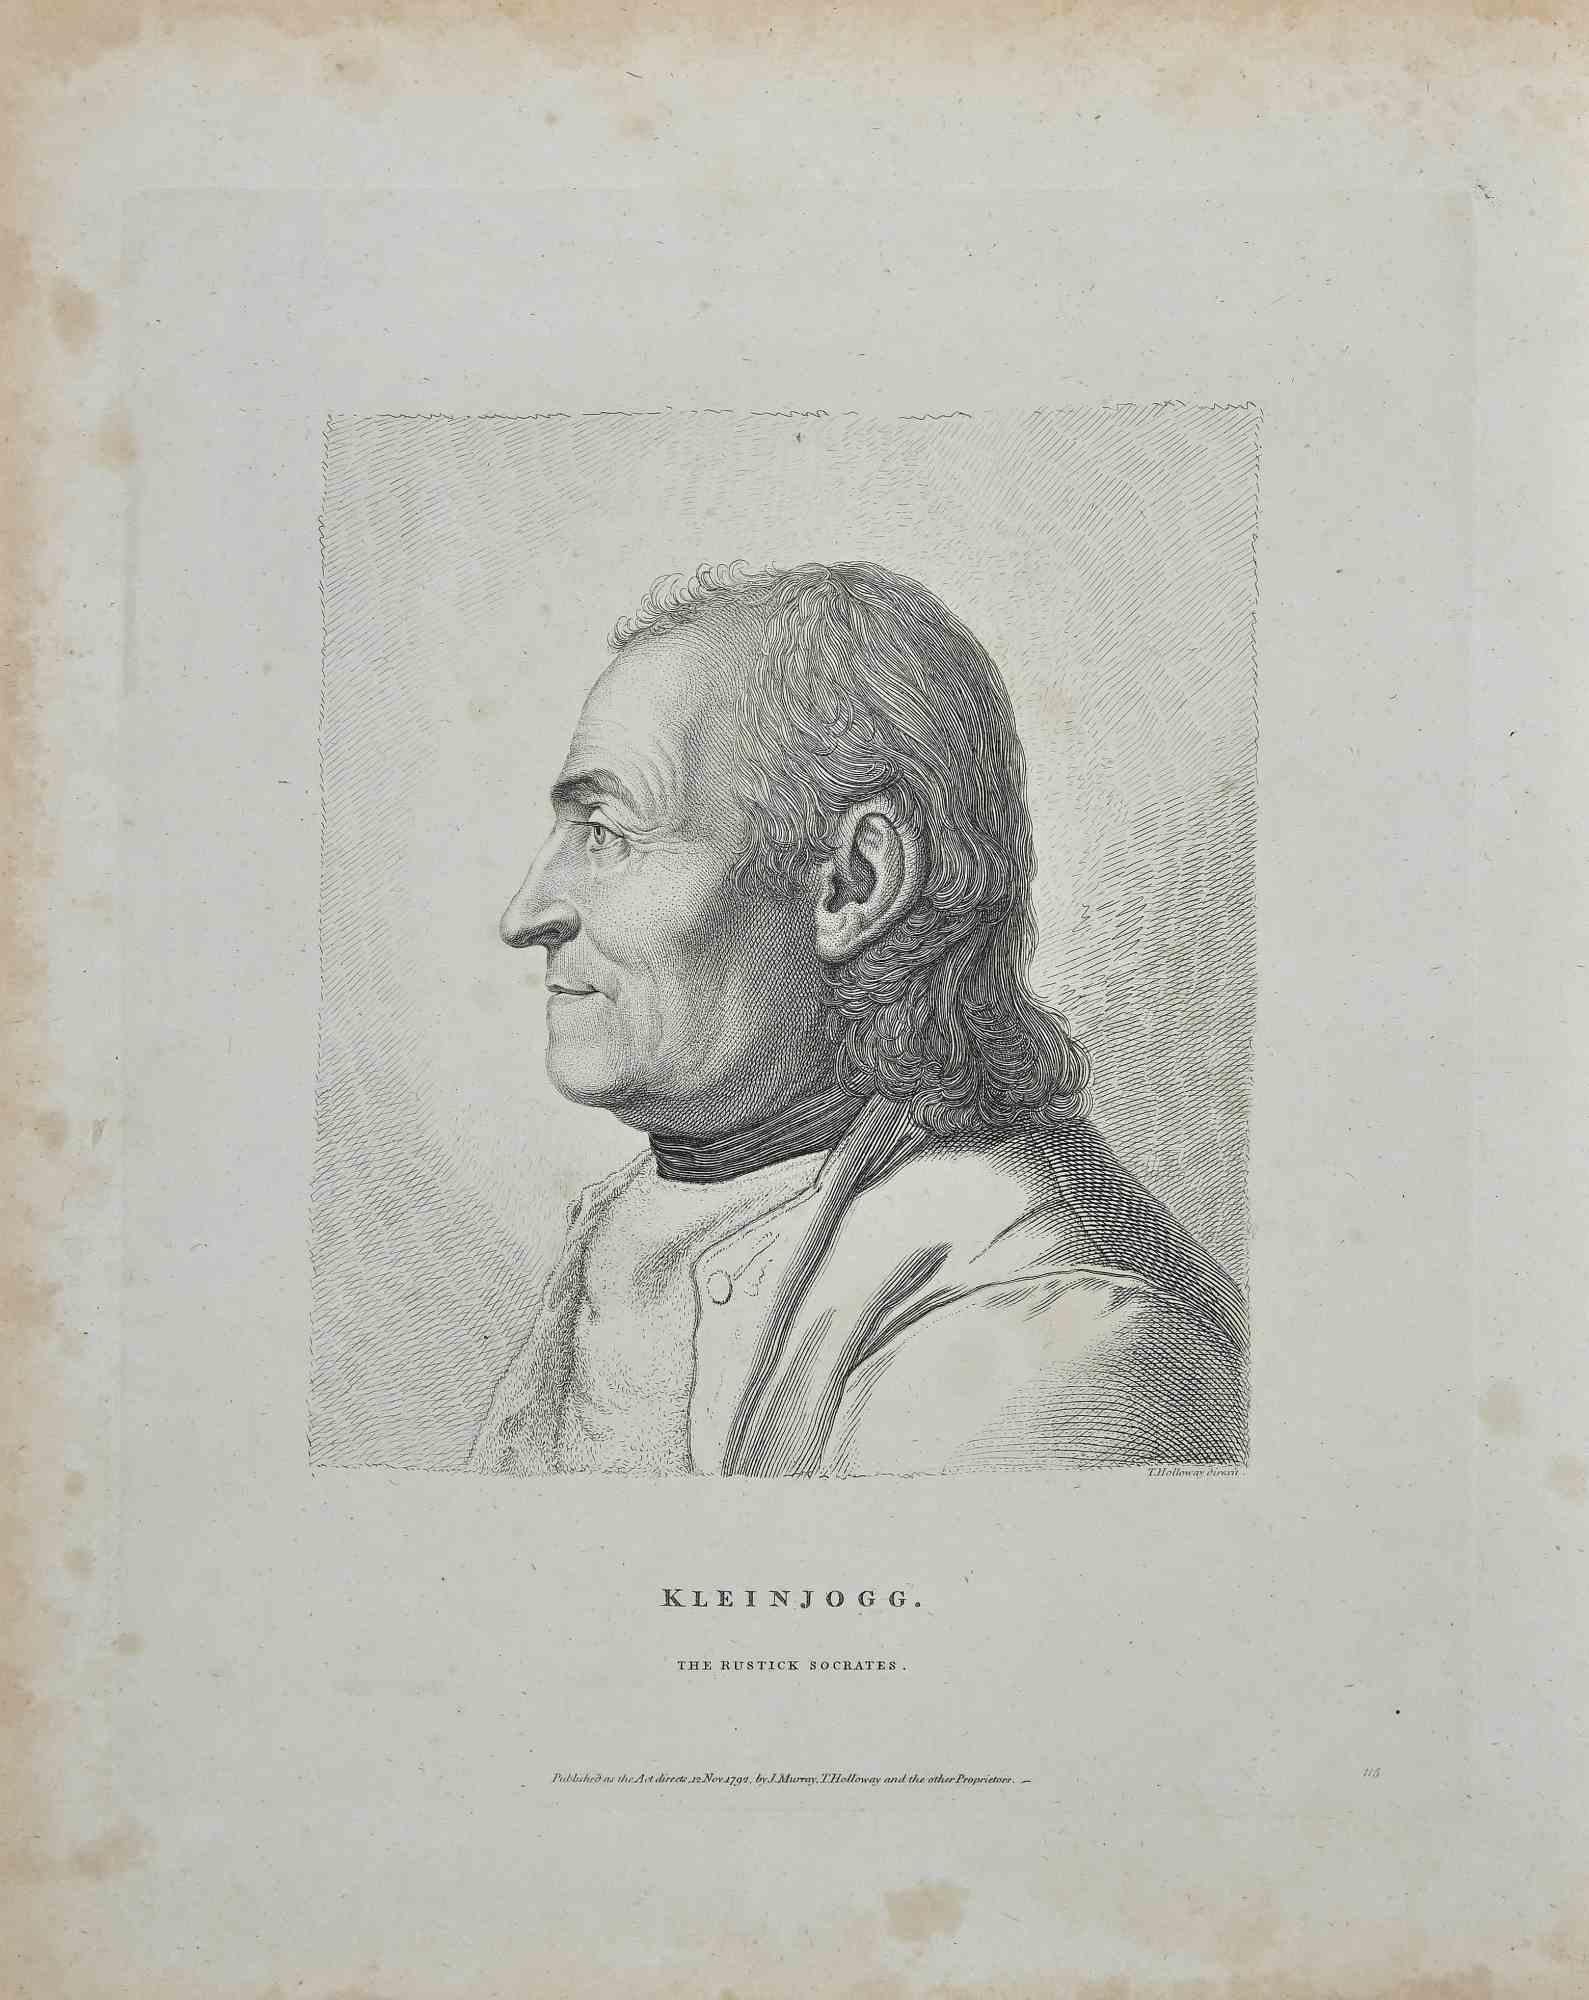 Portrait of the Rustick Socrates Kleinjogg is an original etching artwork realized by Thomas Holloway for Johann Caspar Lavater's "Essays on Physiognomy, Designed to Promote the Knowledge and the Love of Mankind", London, Bensley, 1810. 

Signed on